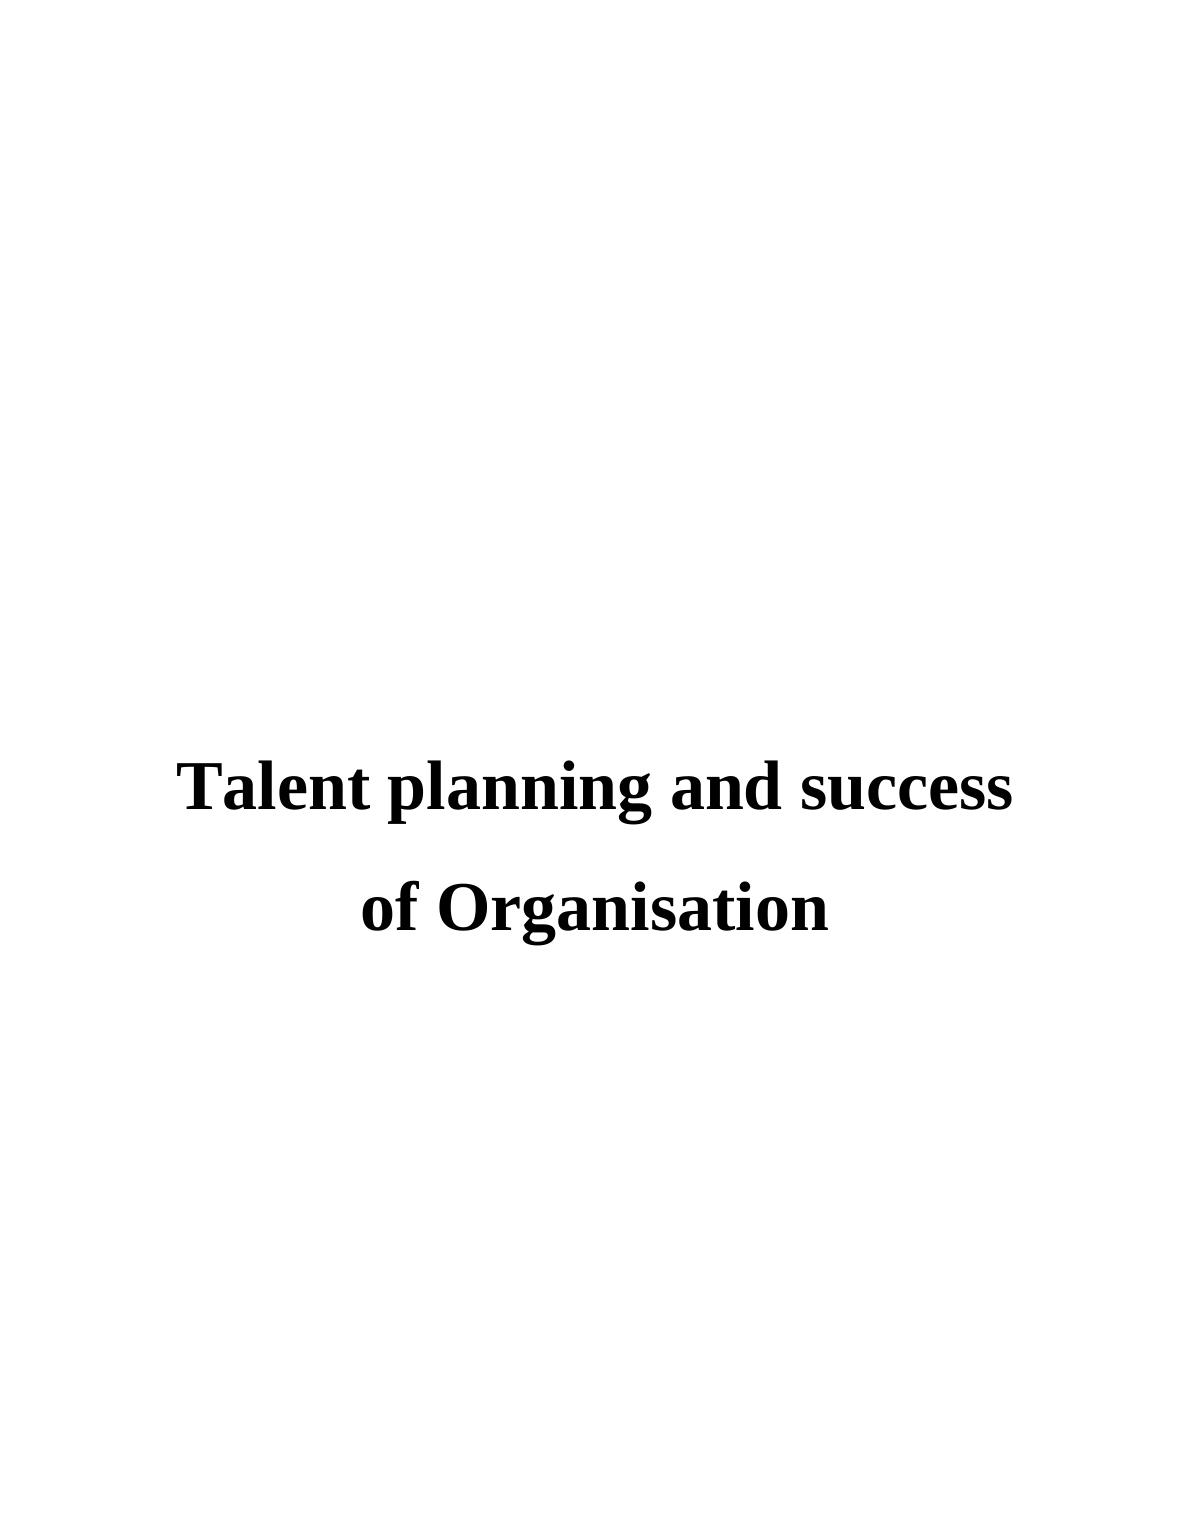 Talent Planning and Success of Organisation (pdf)_1